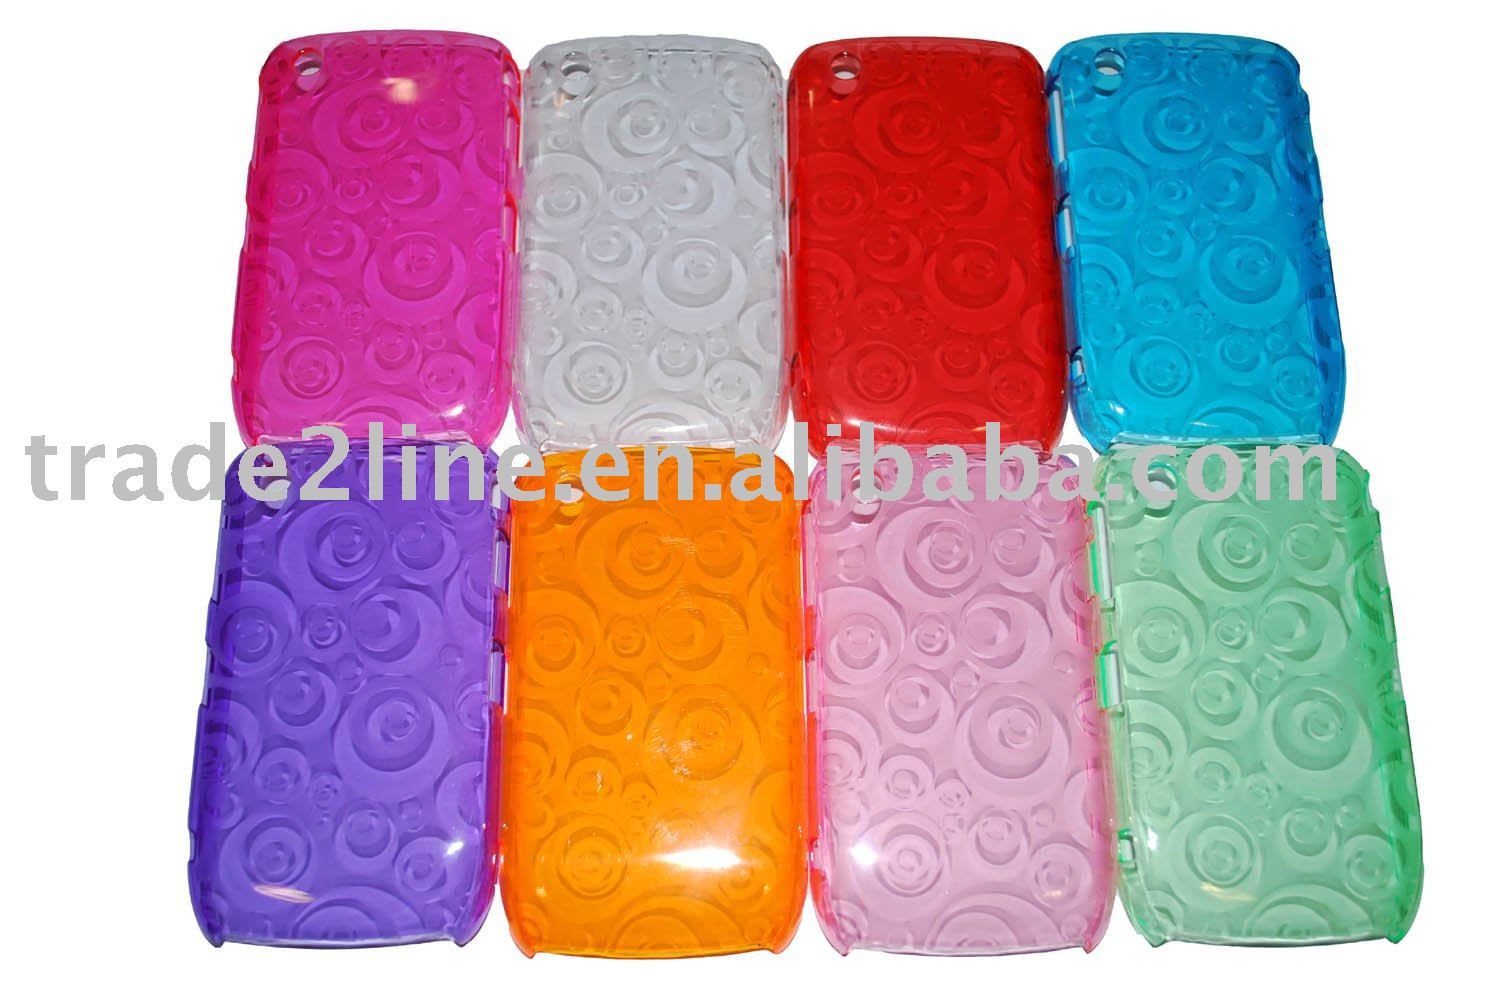 http://1.bp.blogspot.com/-3v8vMsPZwVM/TWPpx3nUEgI/AAAAAAAAABM/a5828wFQI_M/s1600/Accessories_for_BlackBerry_Special_back_cover_for_BlackBerry_8520.jpg